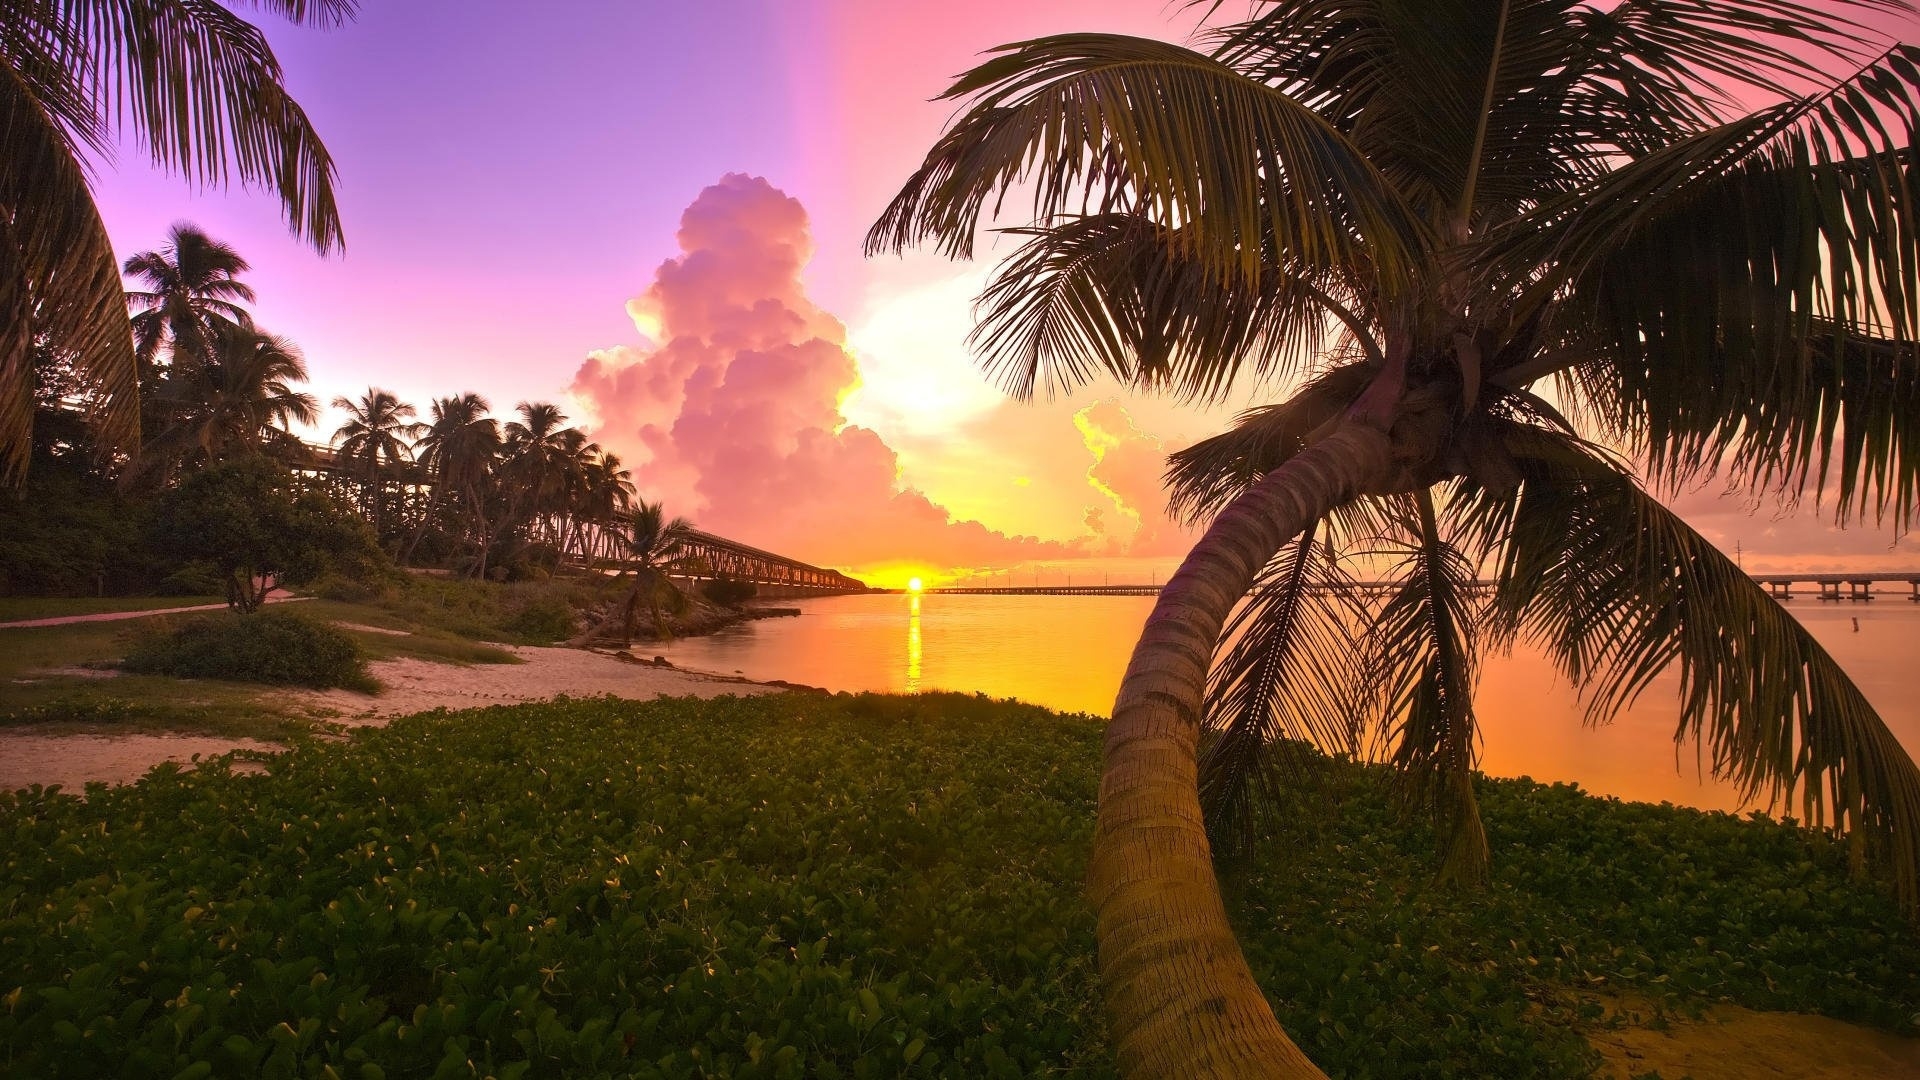 General 1920x1080 nature sunset beach palm trees